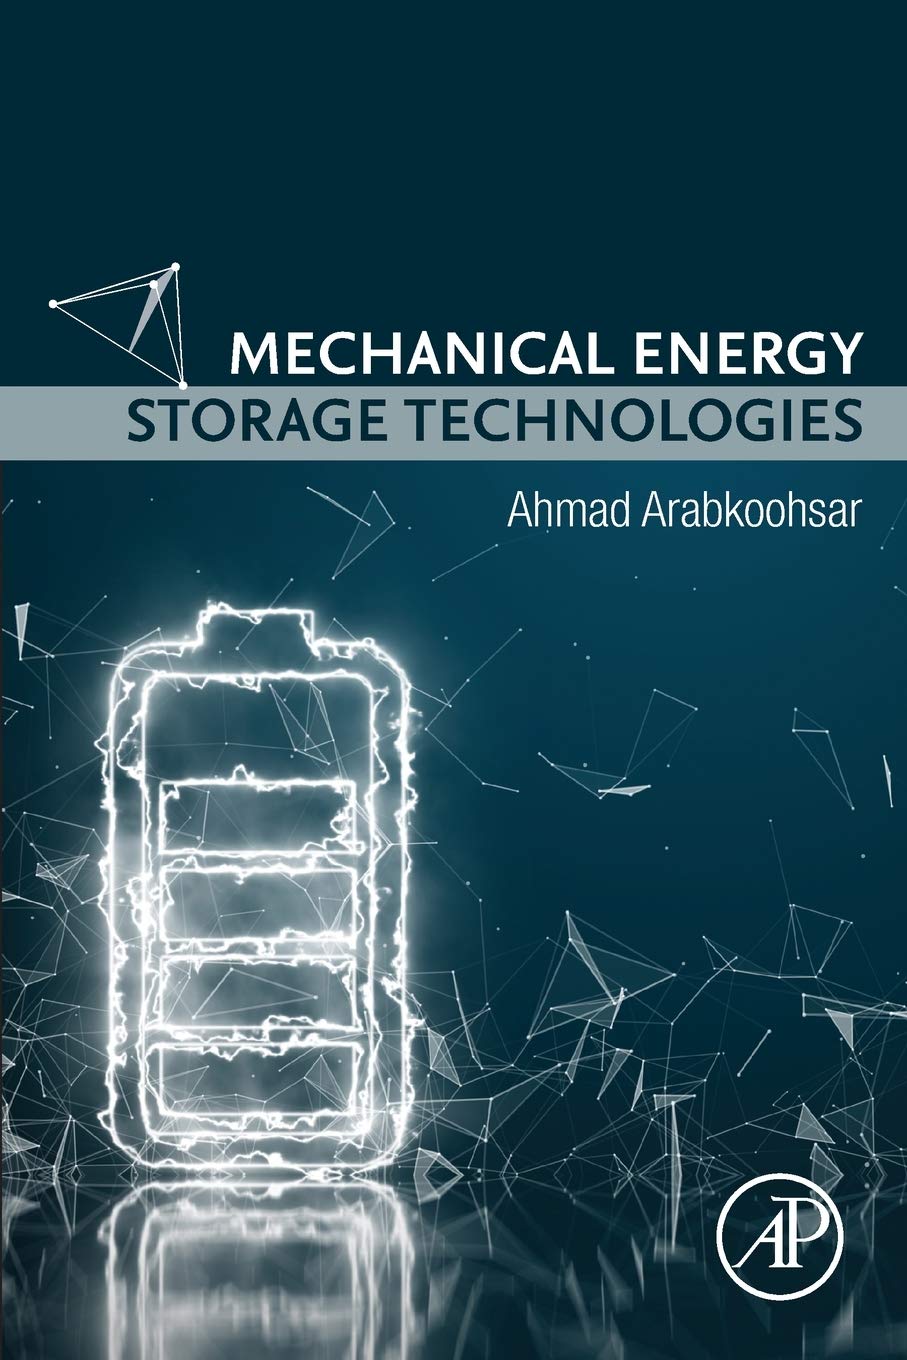 Download Mechanical Energy Storage Technologies - SoftArchive